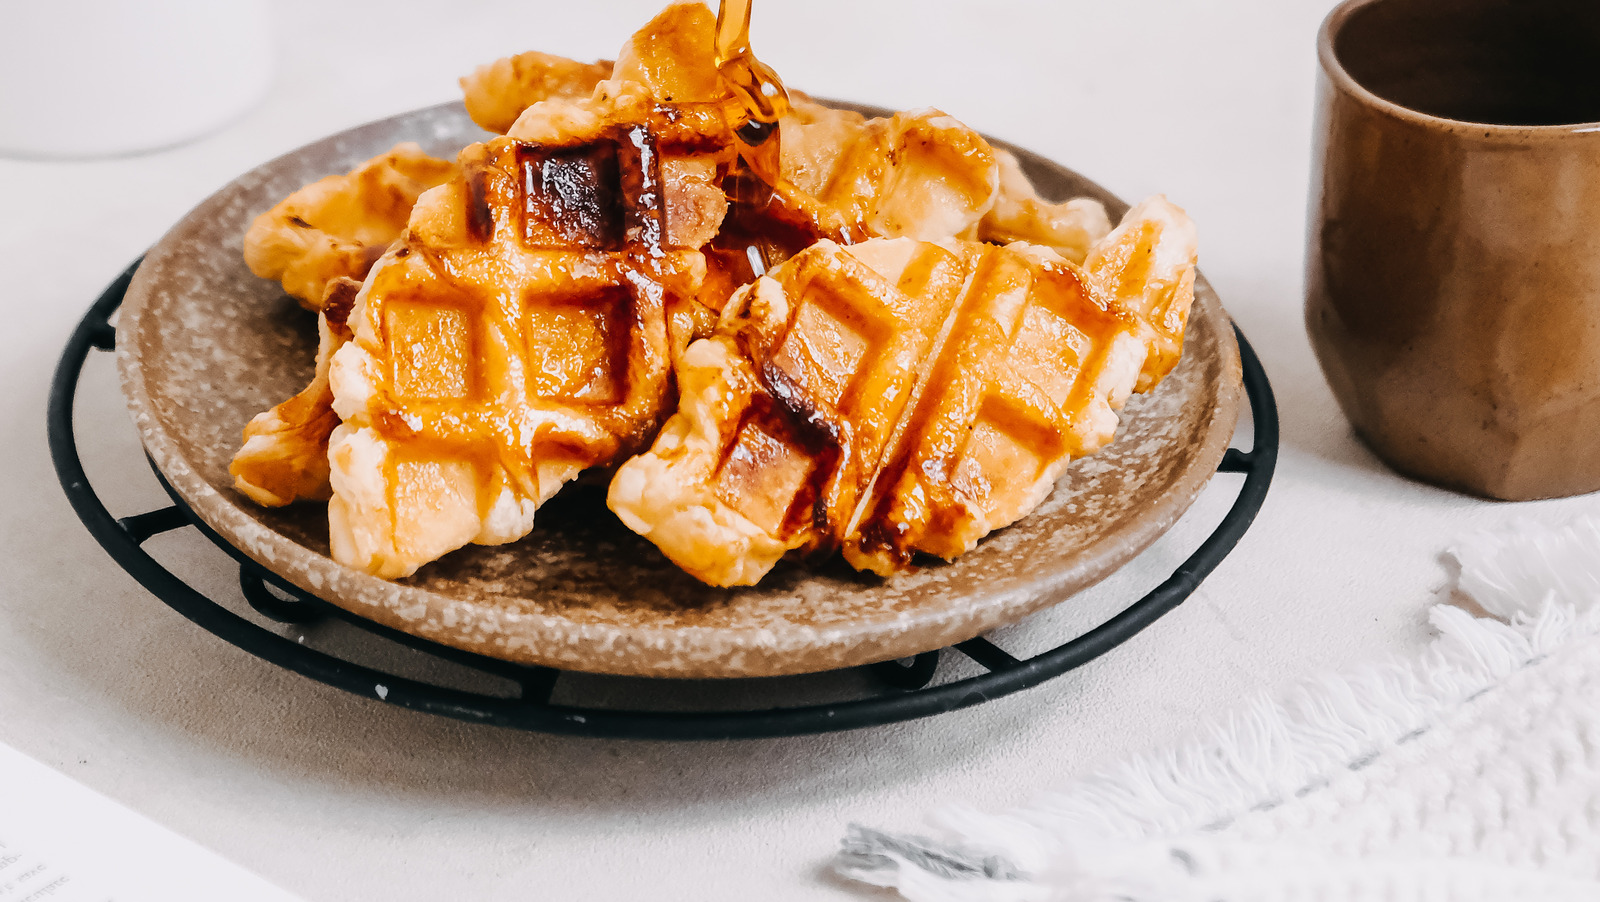 https://www.tastingtable.com/img/gallery/16-types-of-waffles-explained/l-intro-1664802553.jpg